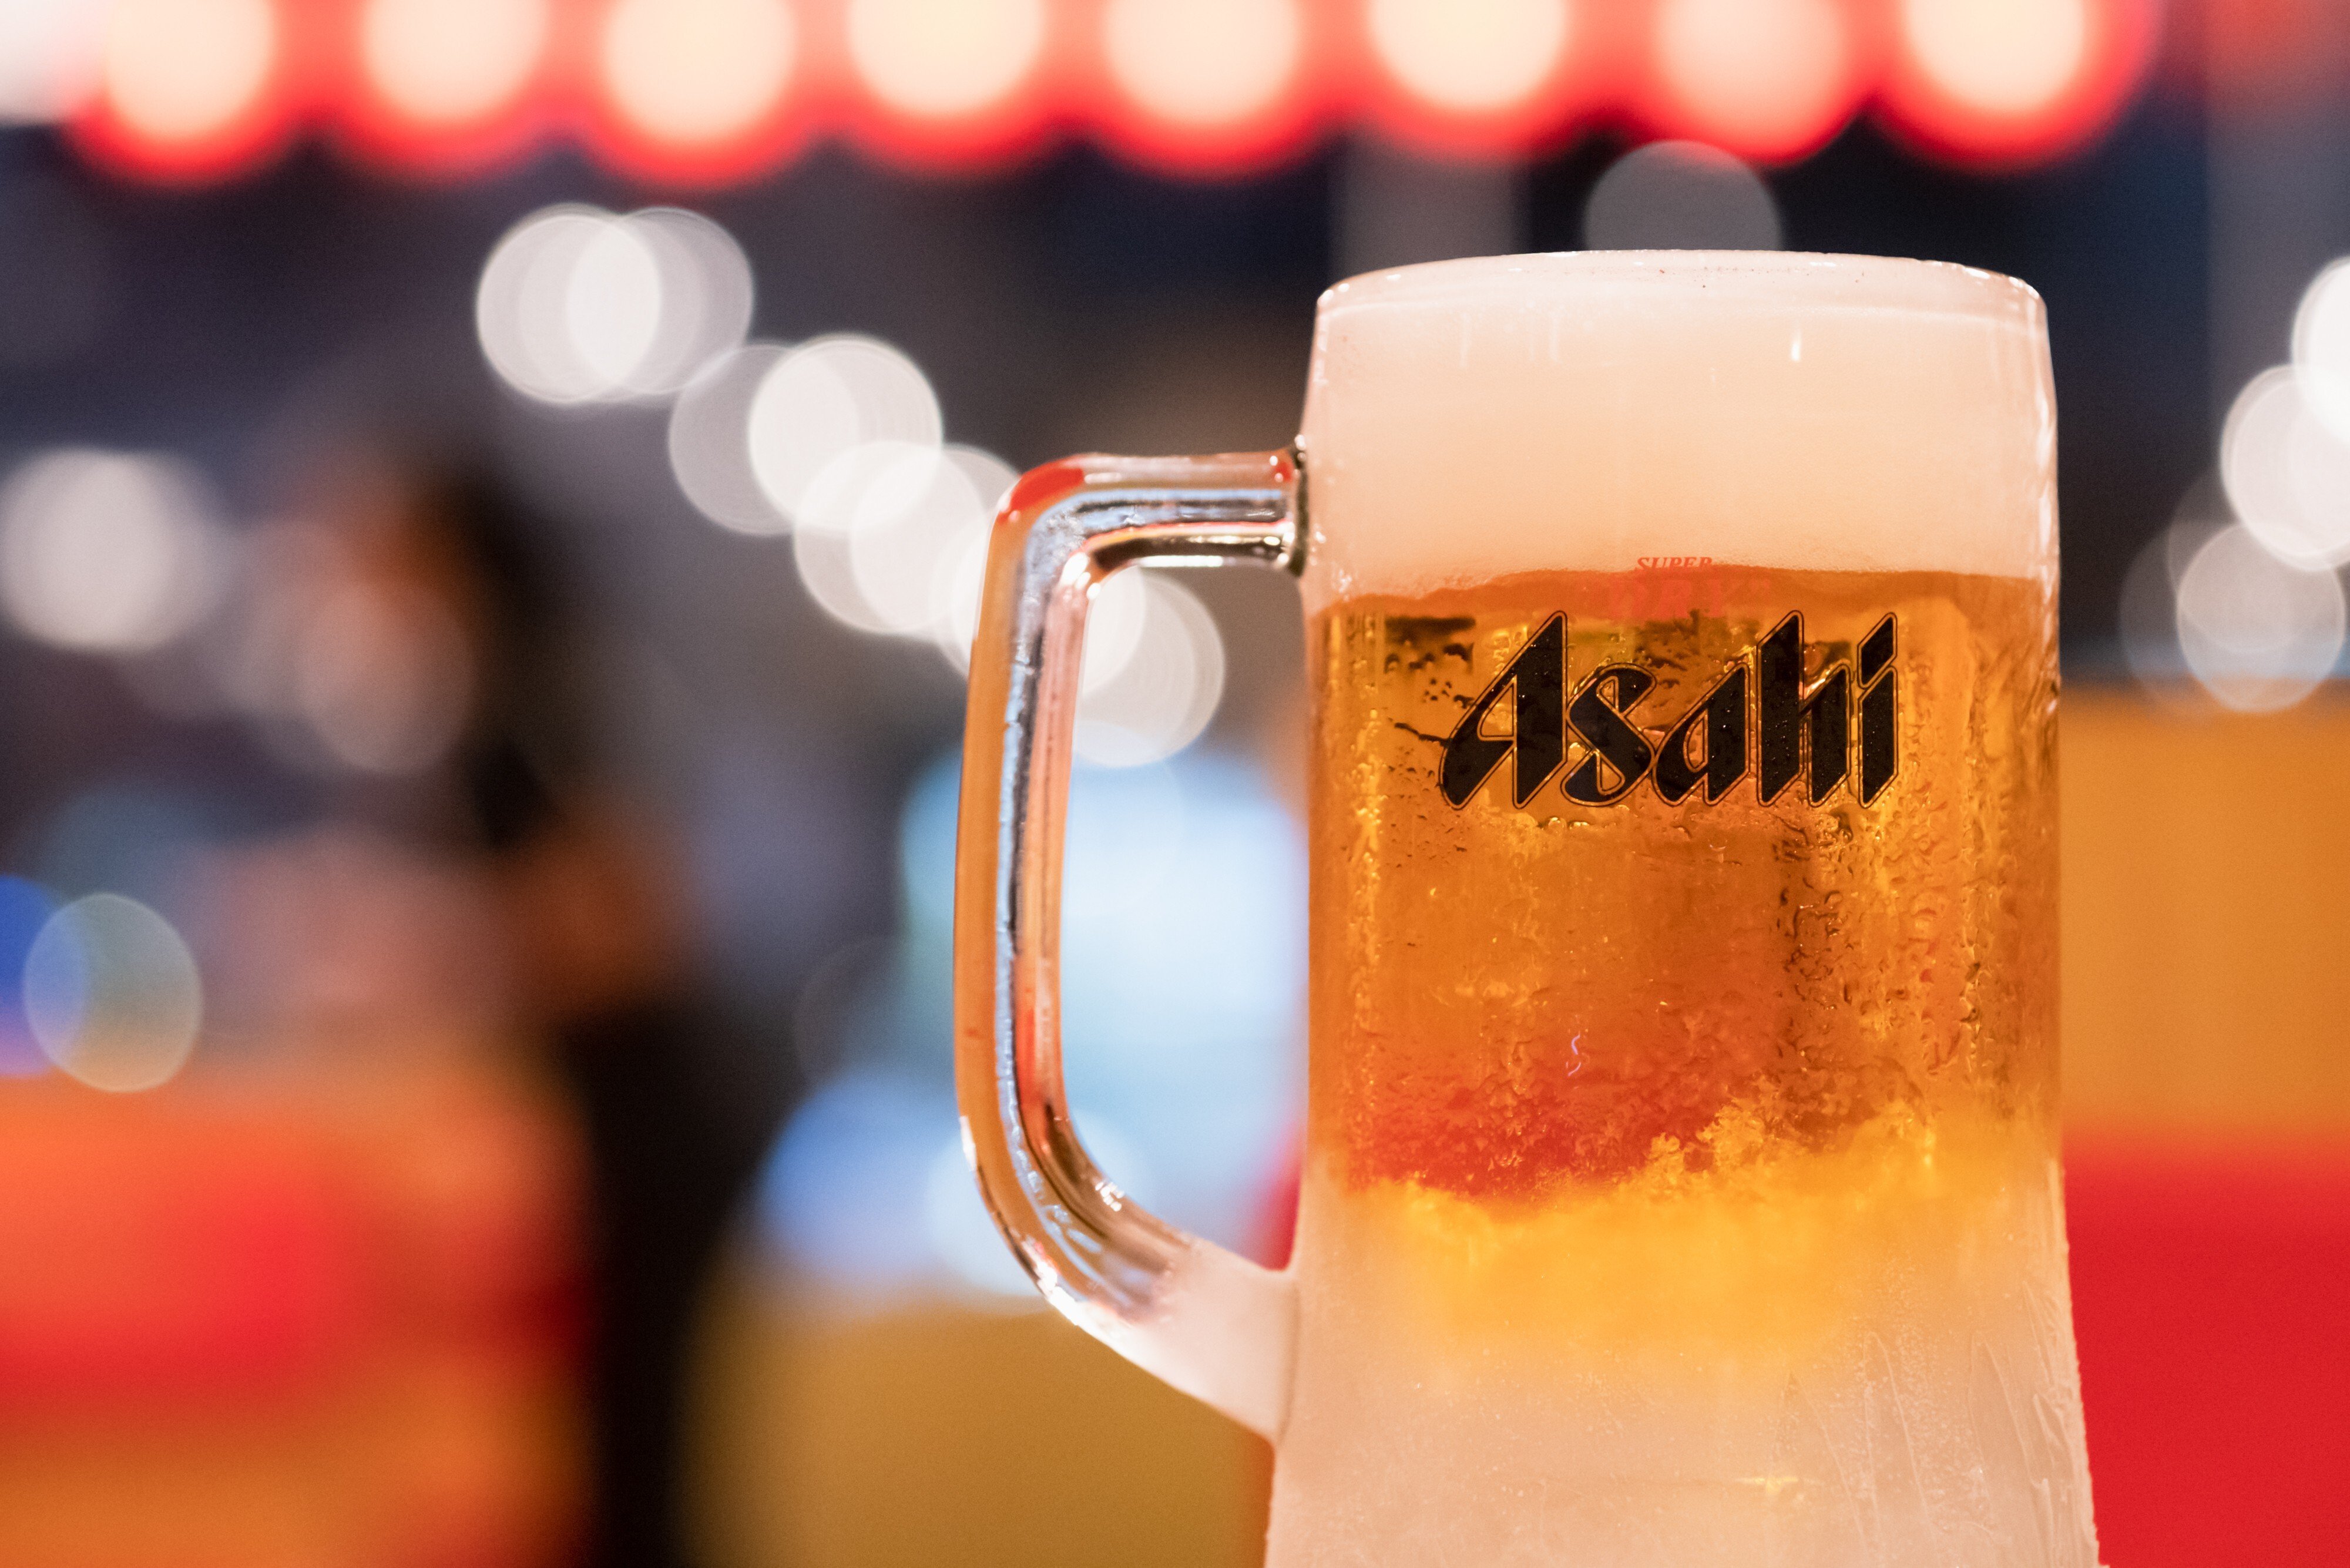 How many cases of Asahi beer are shipped every year?